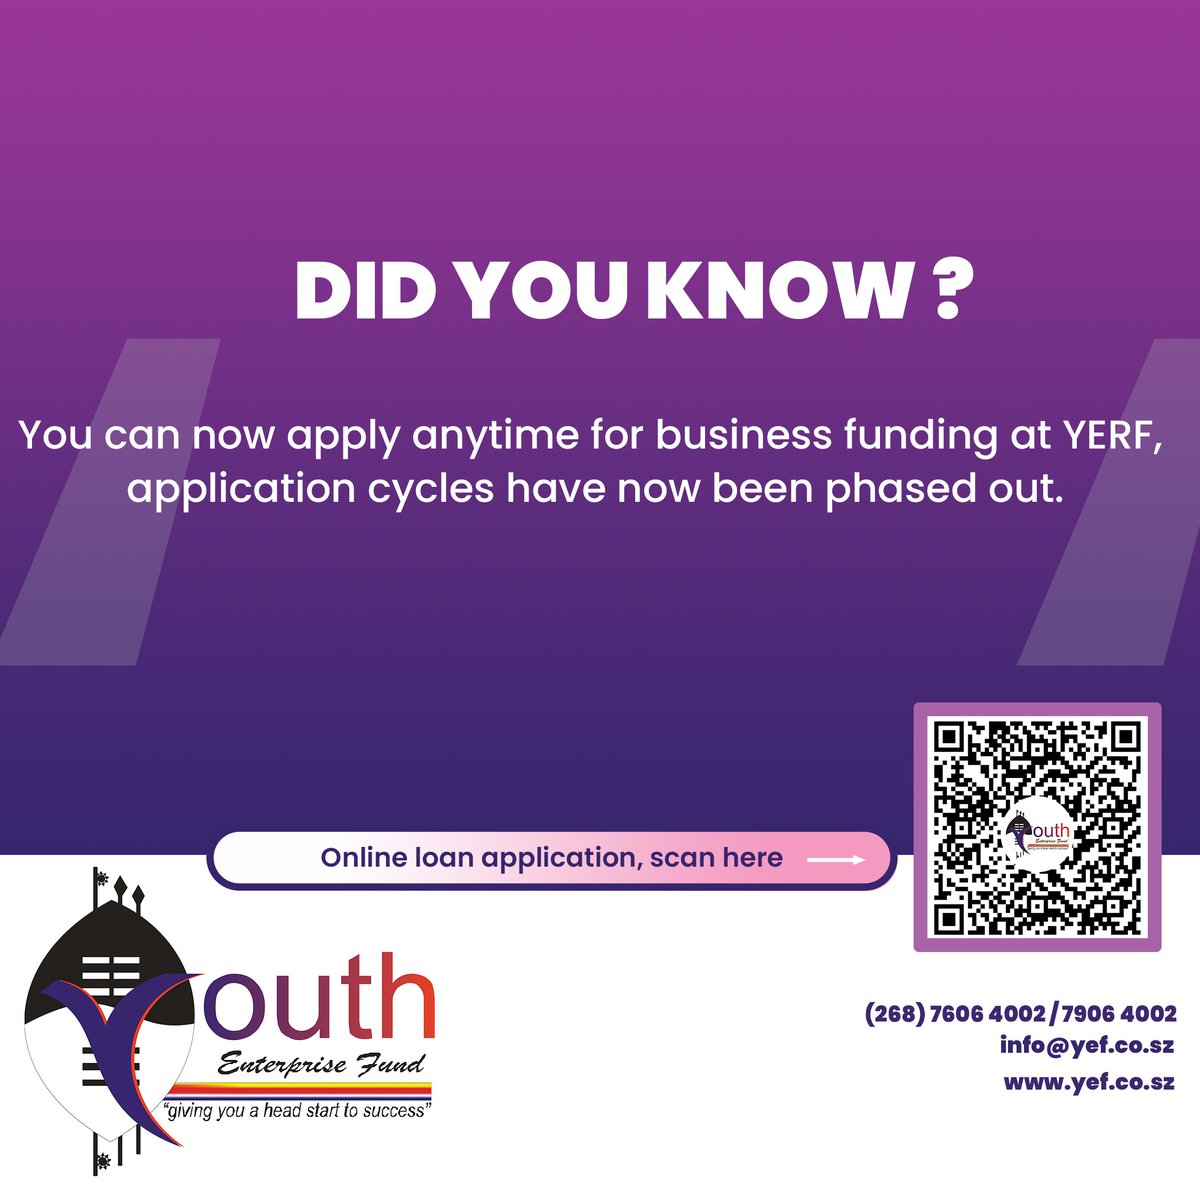 Did You Know?? 🇸🇿🇸🇿
 
YERF used to accept applications on specific periods, leading to many youth entrepreneurs missing deadlines, so cycles were phased out to increase flexibility. 

#youthfund 
#youthentrepreneurship 
#fundingopportunities